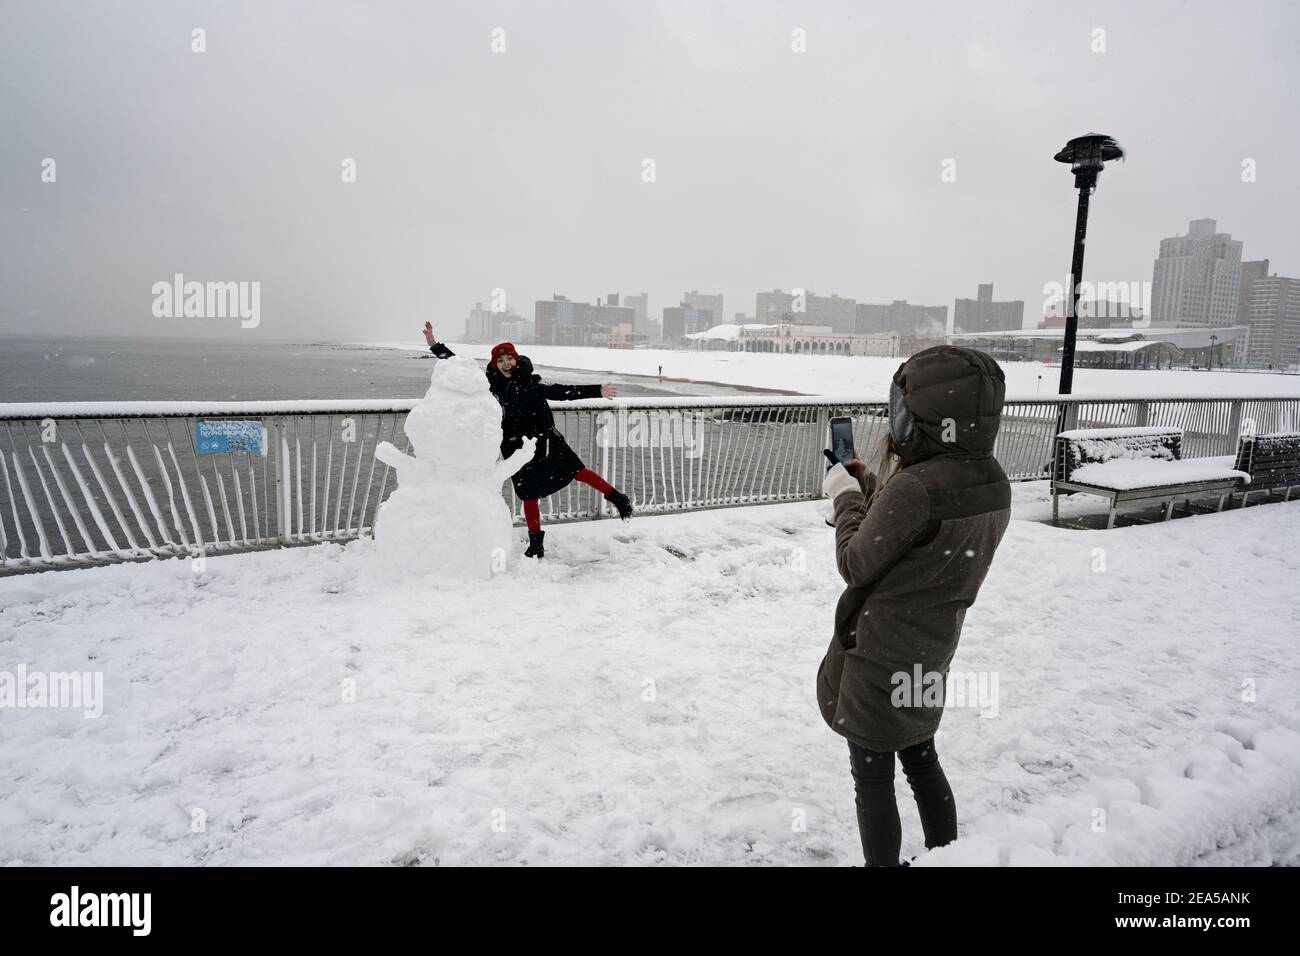 Brooklyn, New York, USA. 07 February 2021, Brooklyn, New York, USA. Woman poses with snowman on pier on Brooklyn's famous Coney Island as New York City experiences its second major winter storm in seven days Credit: Joseph Reid/Alamy Live News Stock Photo